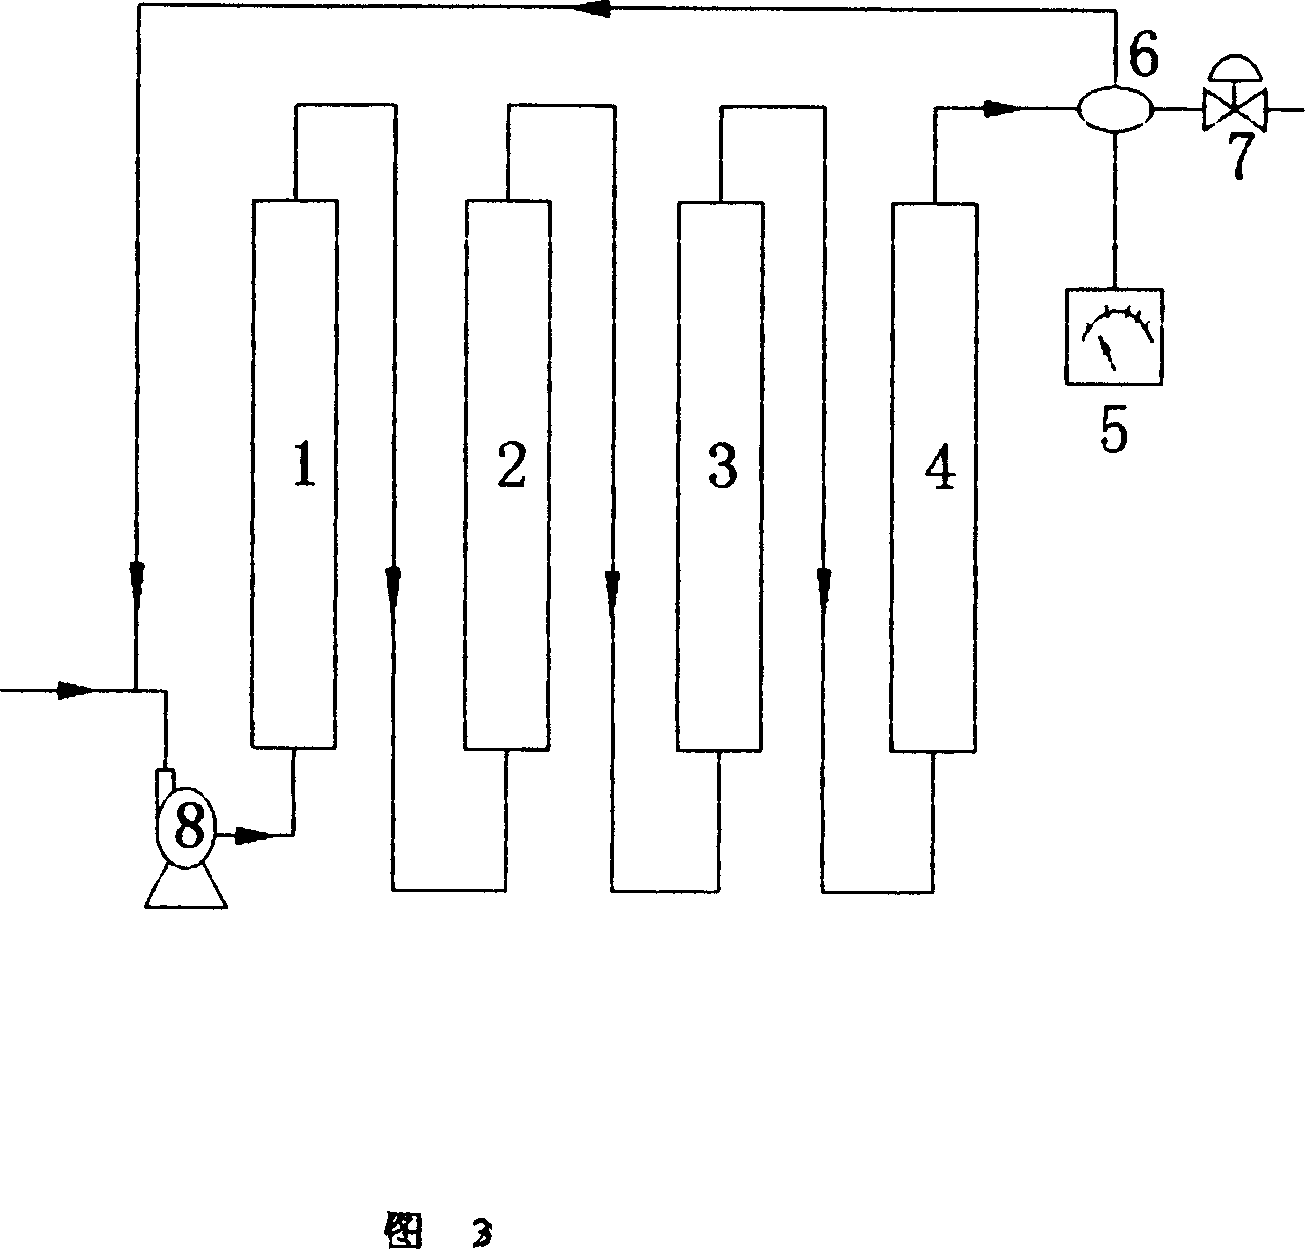 Apparatus and process of producing electronics level high purity hydrochloric acid